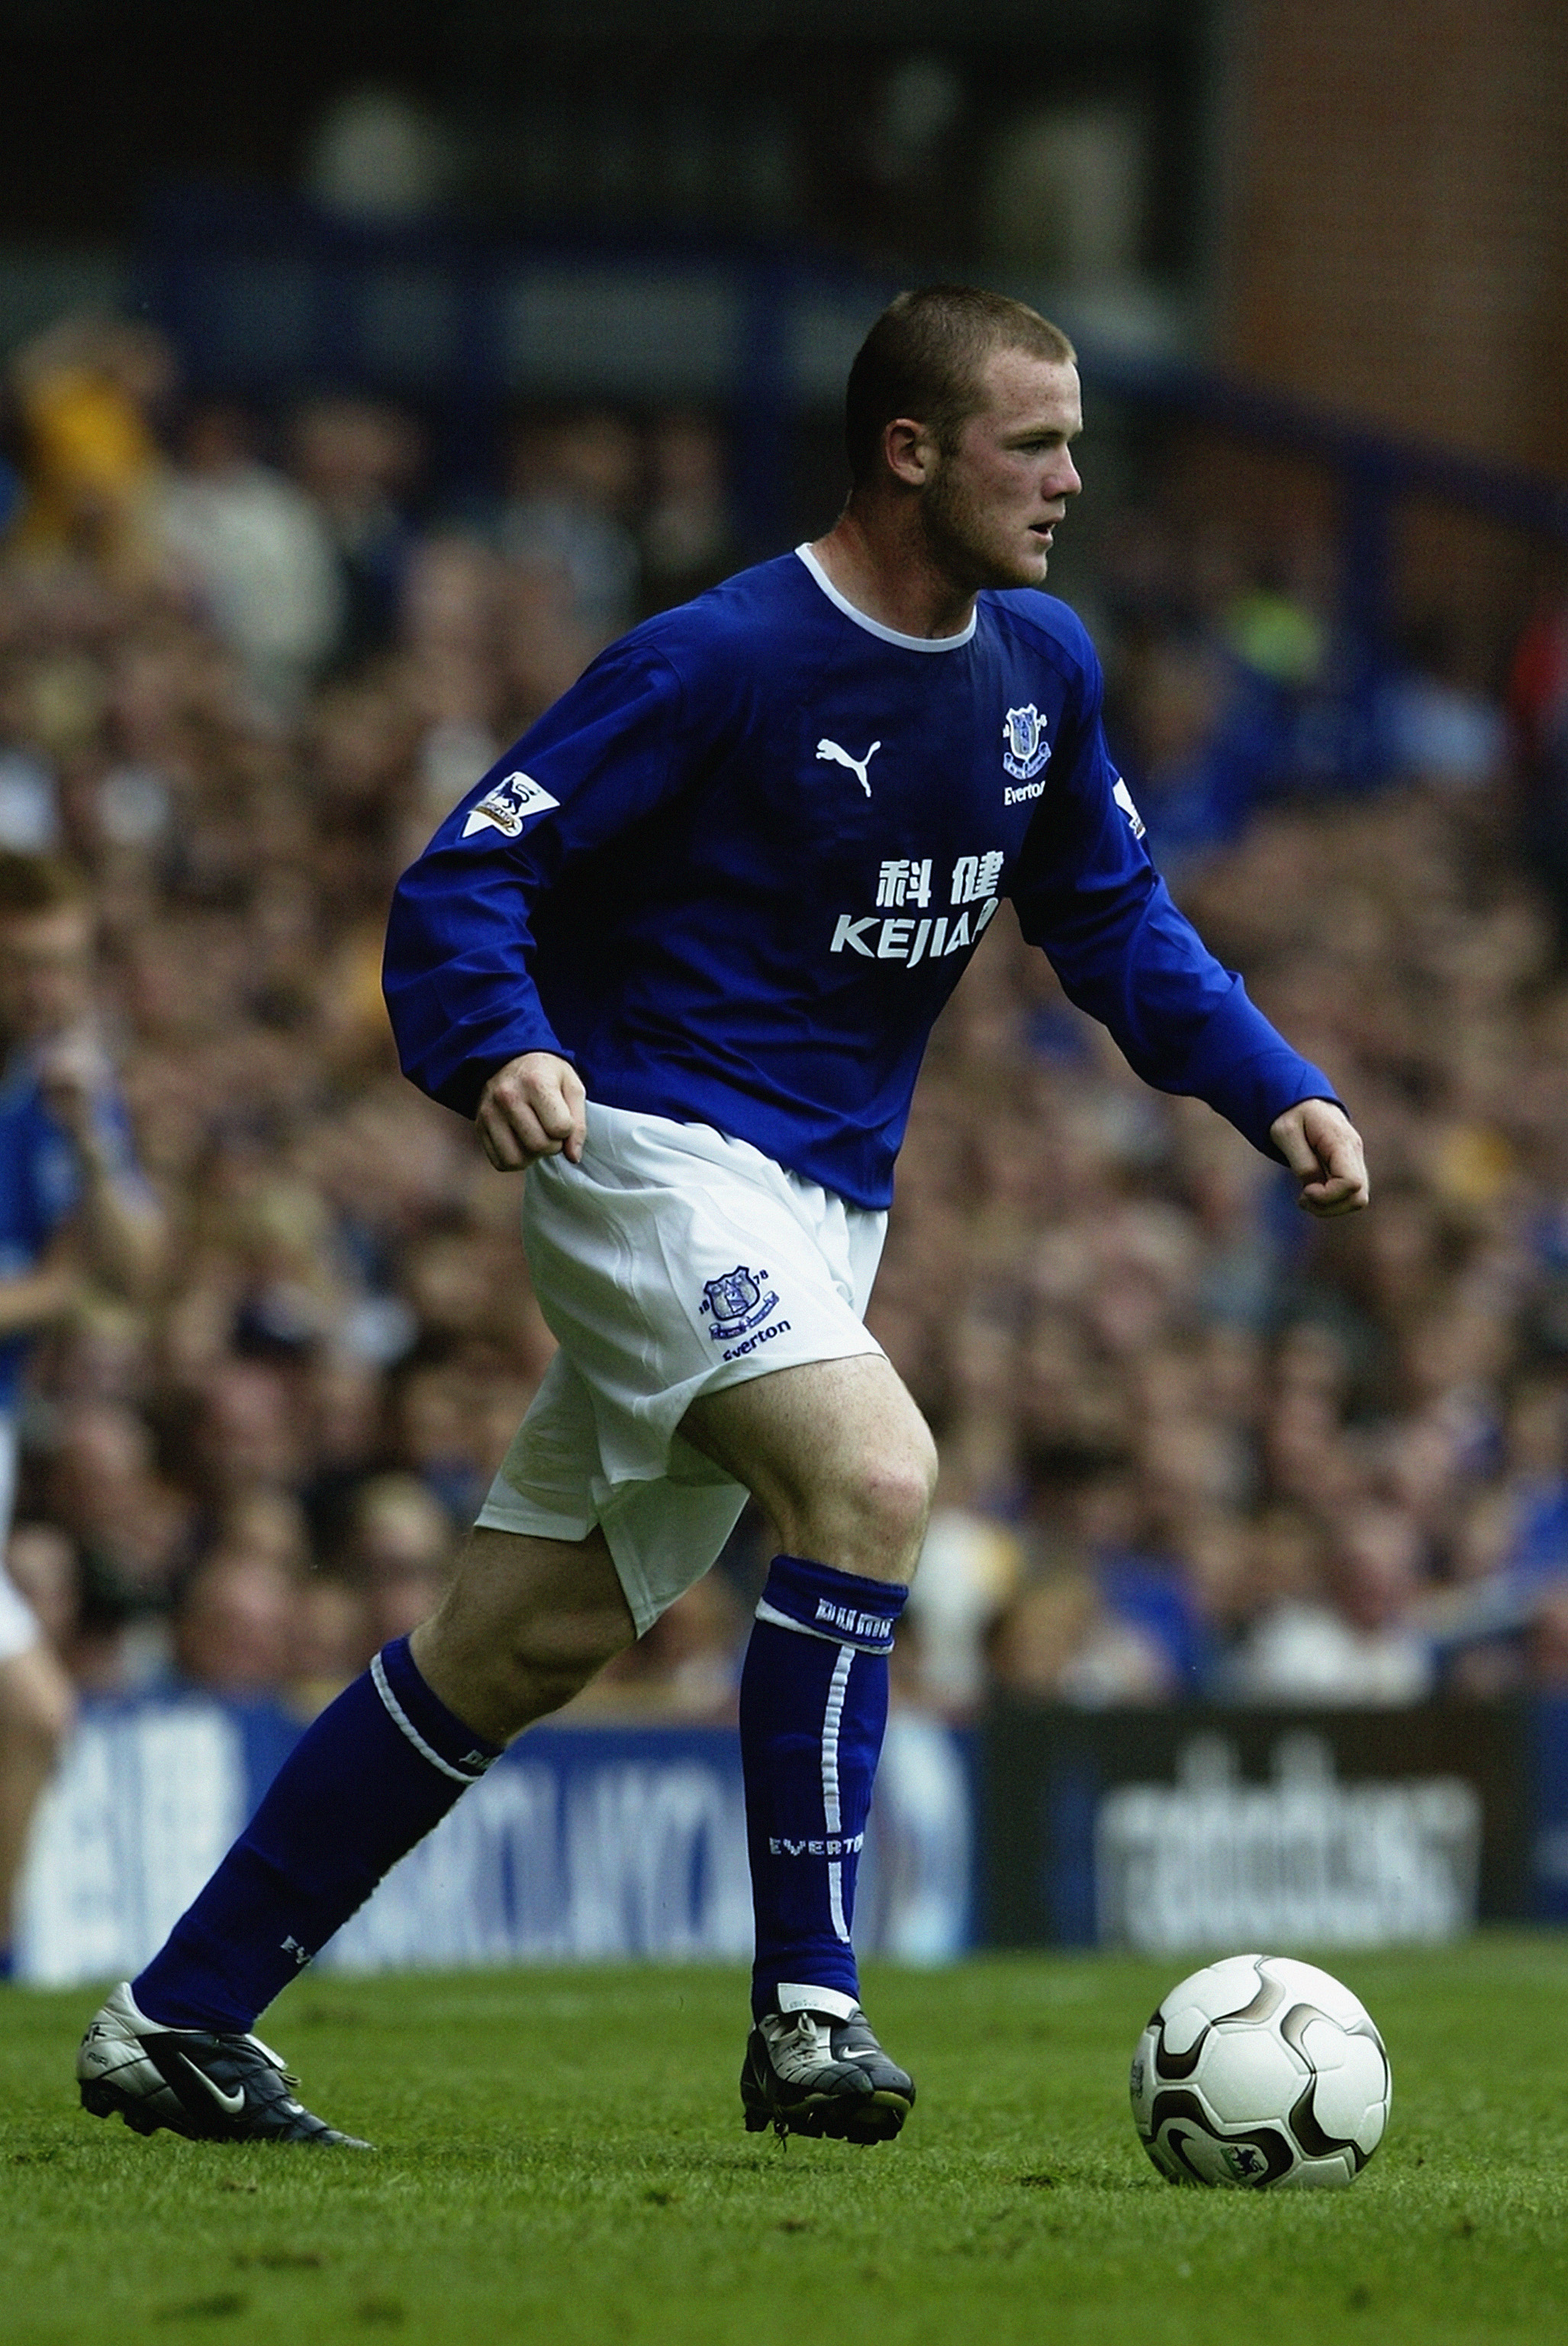 Rooney was perhaps better at 18 than he is at 25